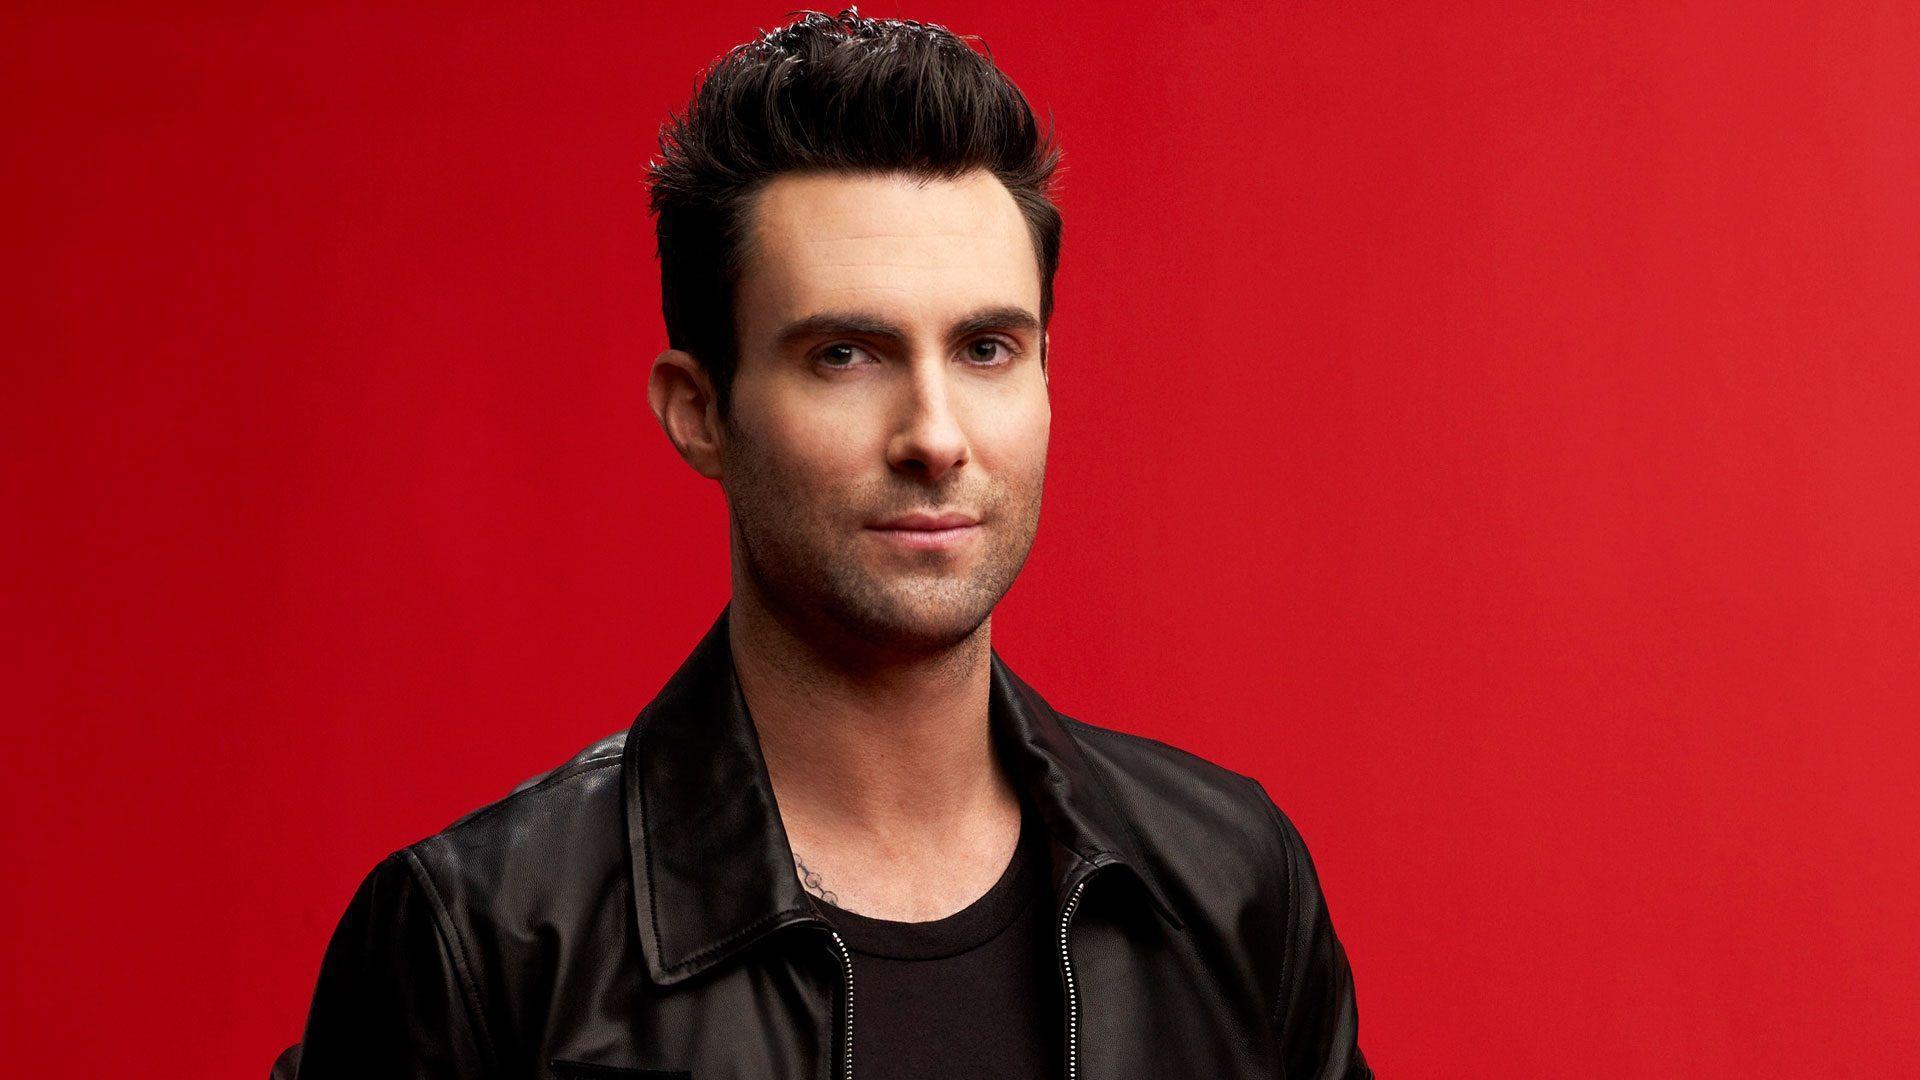 Adam Levine in Leather Jacket with Red Background desktop